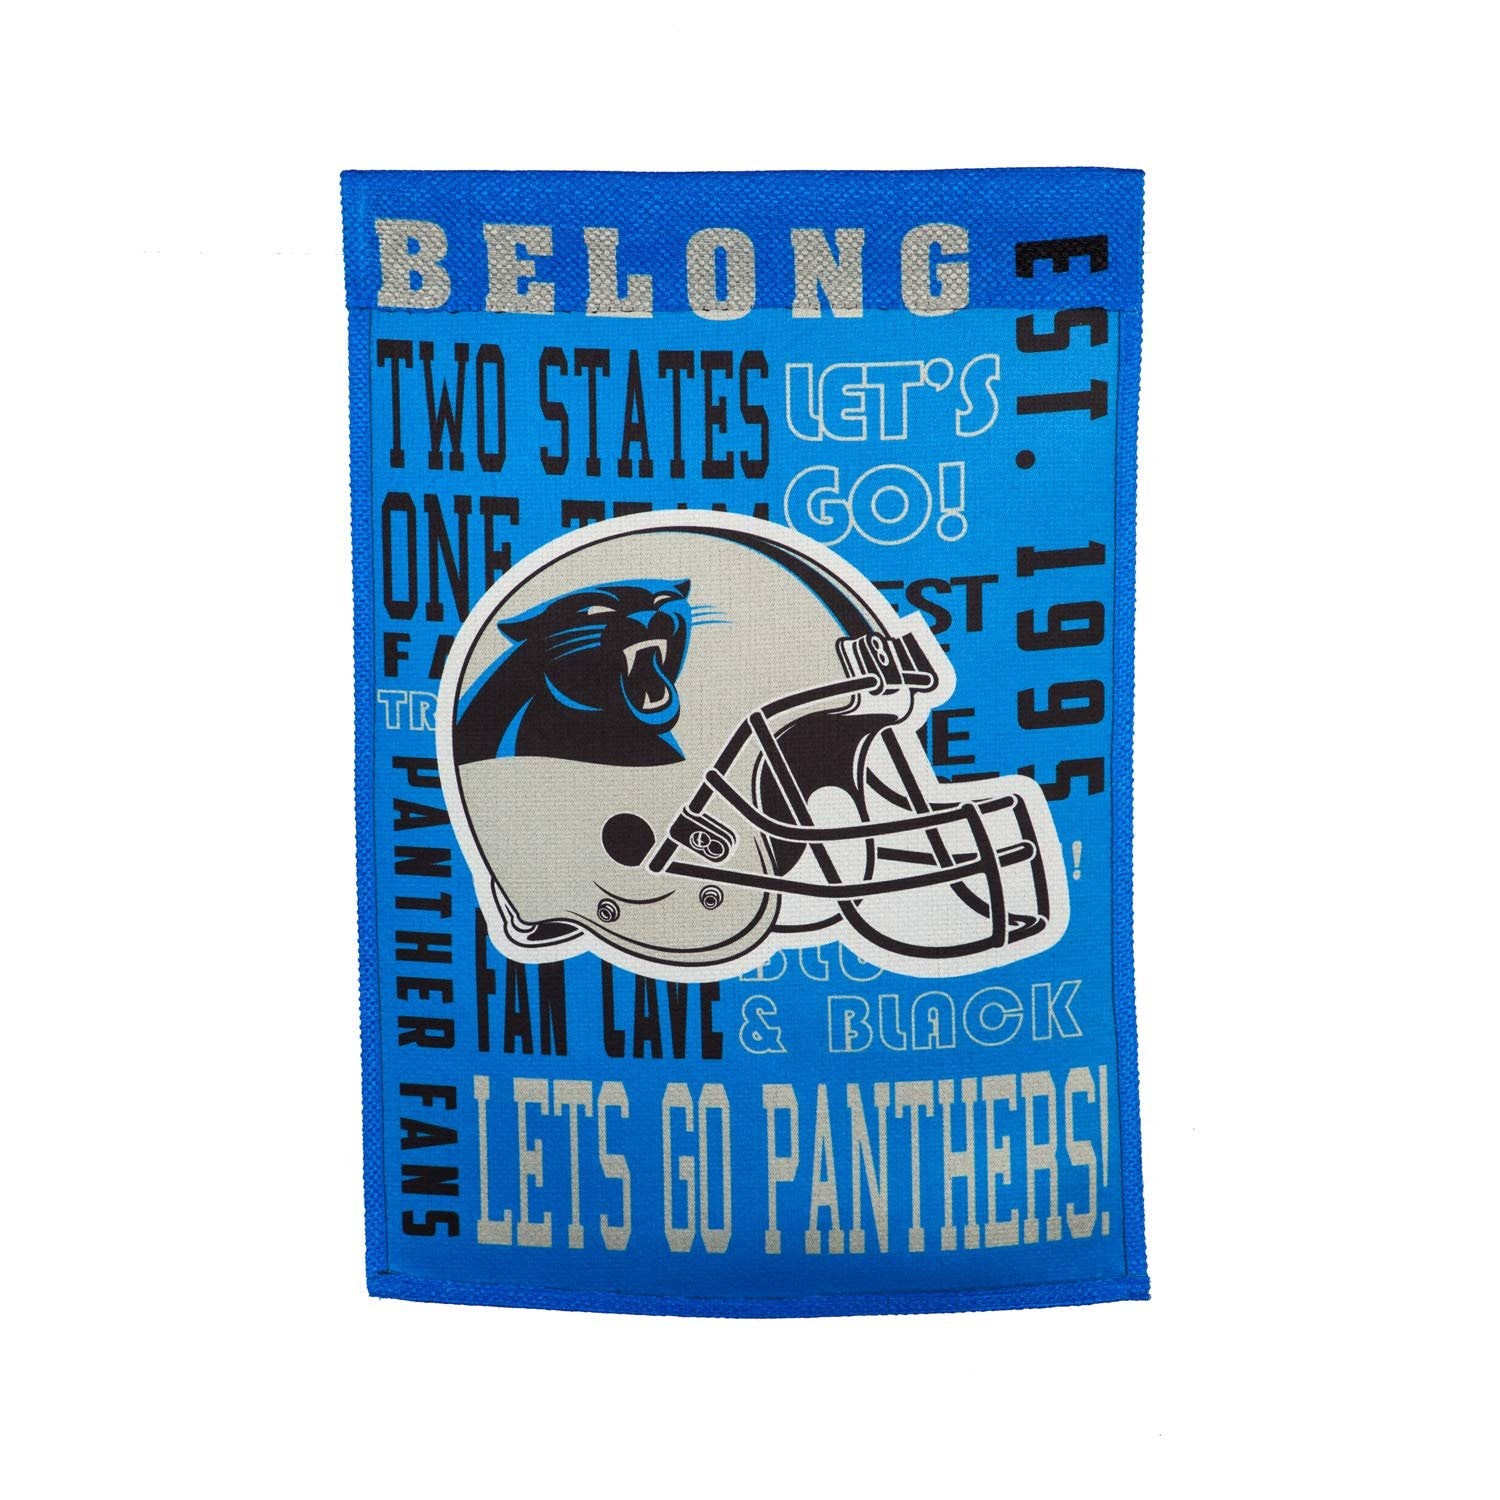 Carolina Panthers Premium Garden Flag Banner, Double Sided, Fan Rules, 13x18 Inch